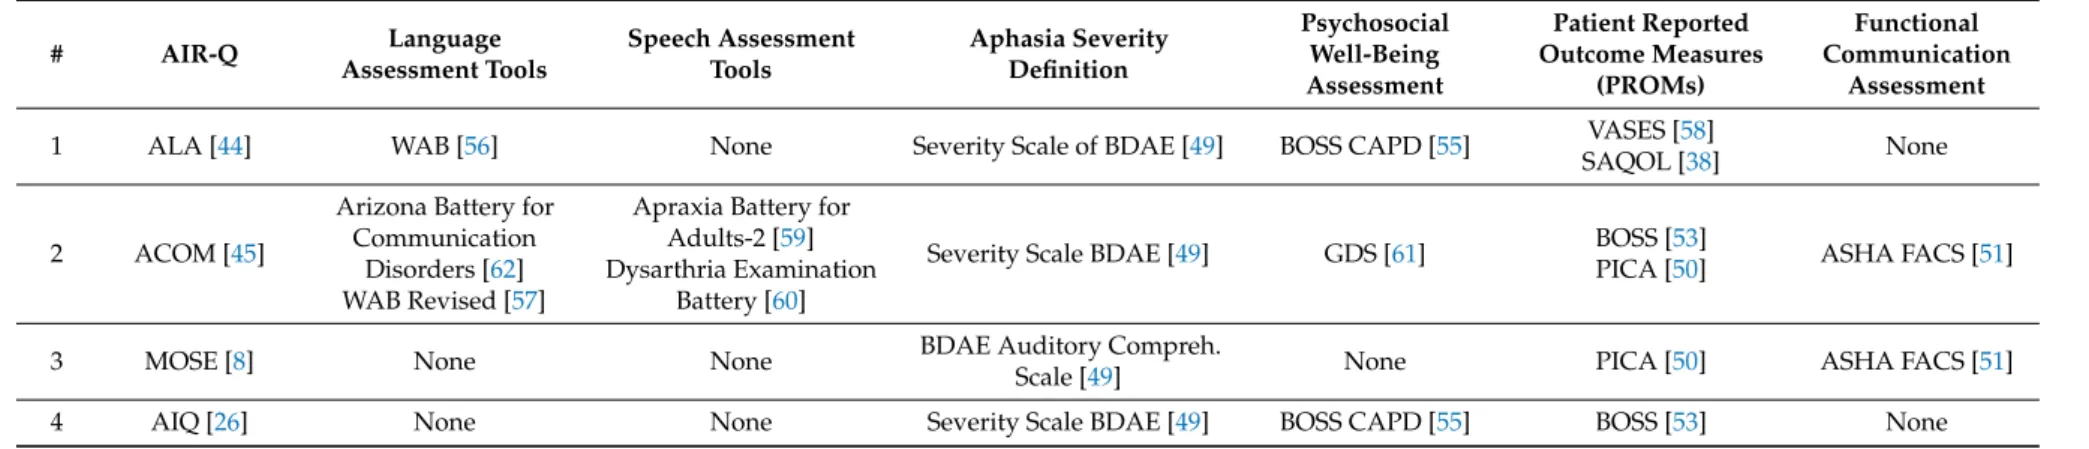 Table 3. Assessment tools used in the four Aphasia Impact Related studies selected in the review.